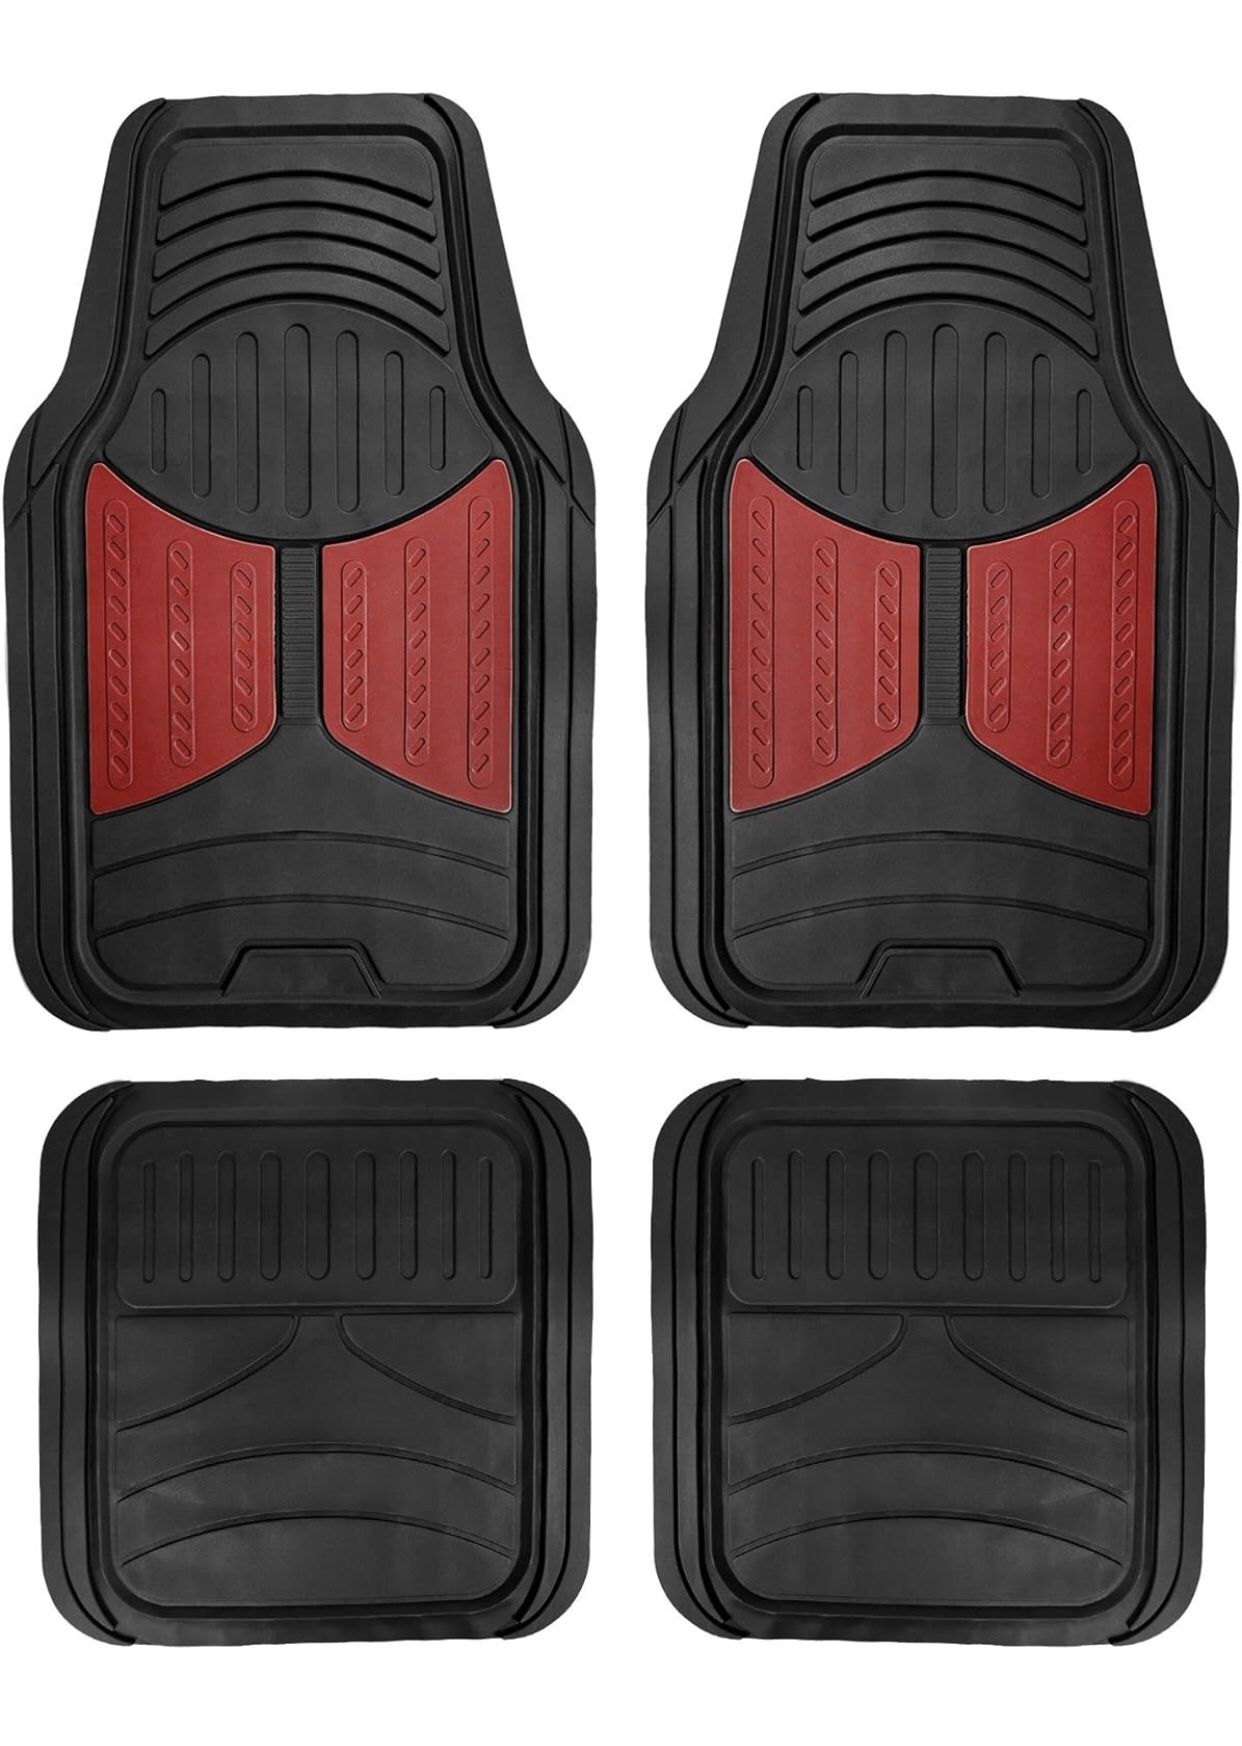 NEW! FH Group Automotive Floor Mats Heavy-Duty Monster Eye Rubber Mats for Cars, Universal, Burgandy